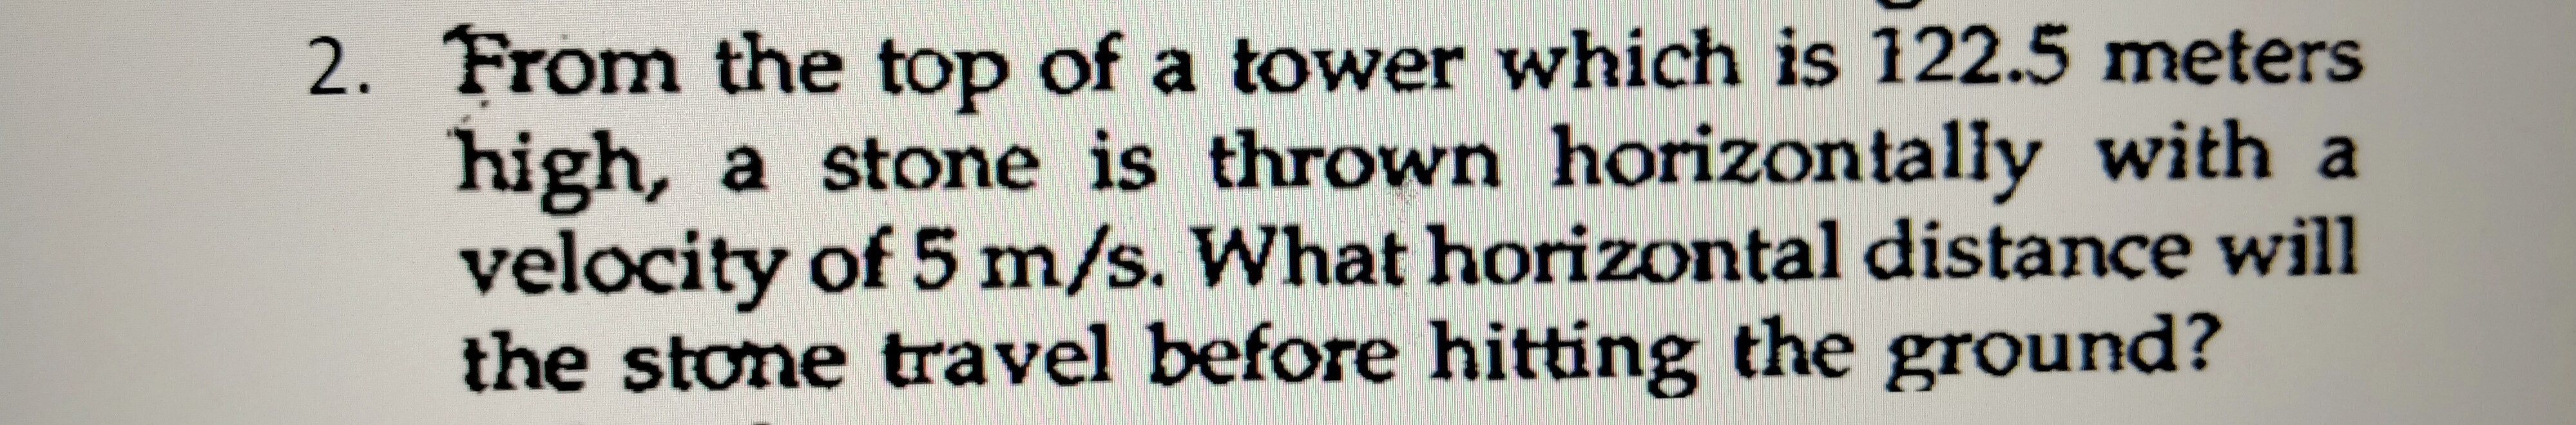 From the top of a tower which is 122.5 meters
high, a stone is thrown horizontally with a
velocity of 5 m/s. What horizontal distance will
the stone travel before hitting the ground?
